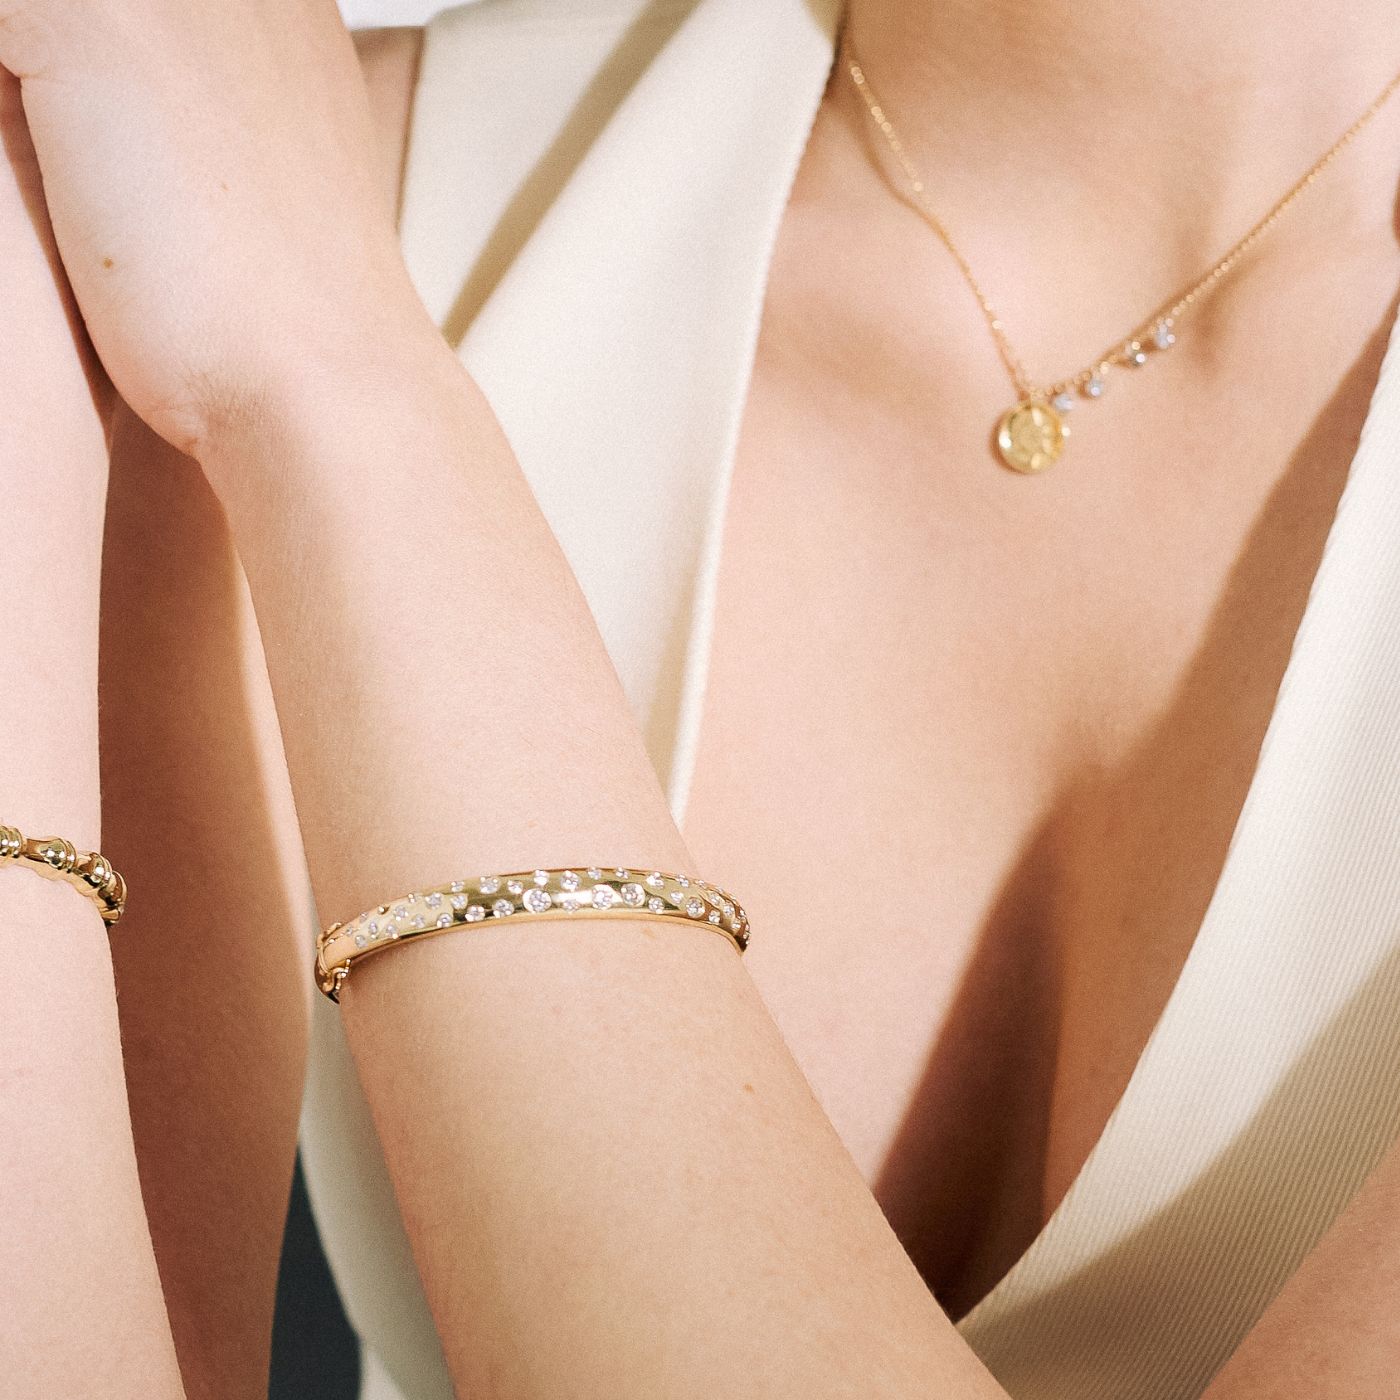 The Scatter Bangle